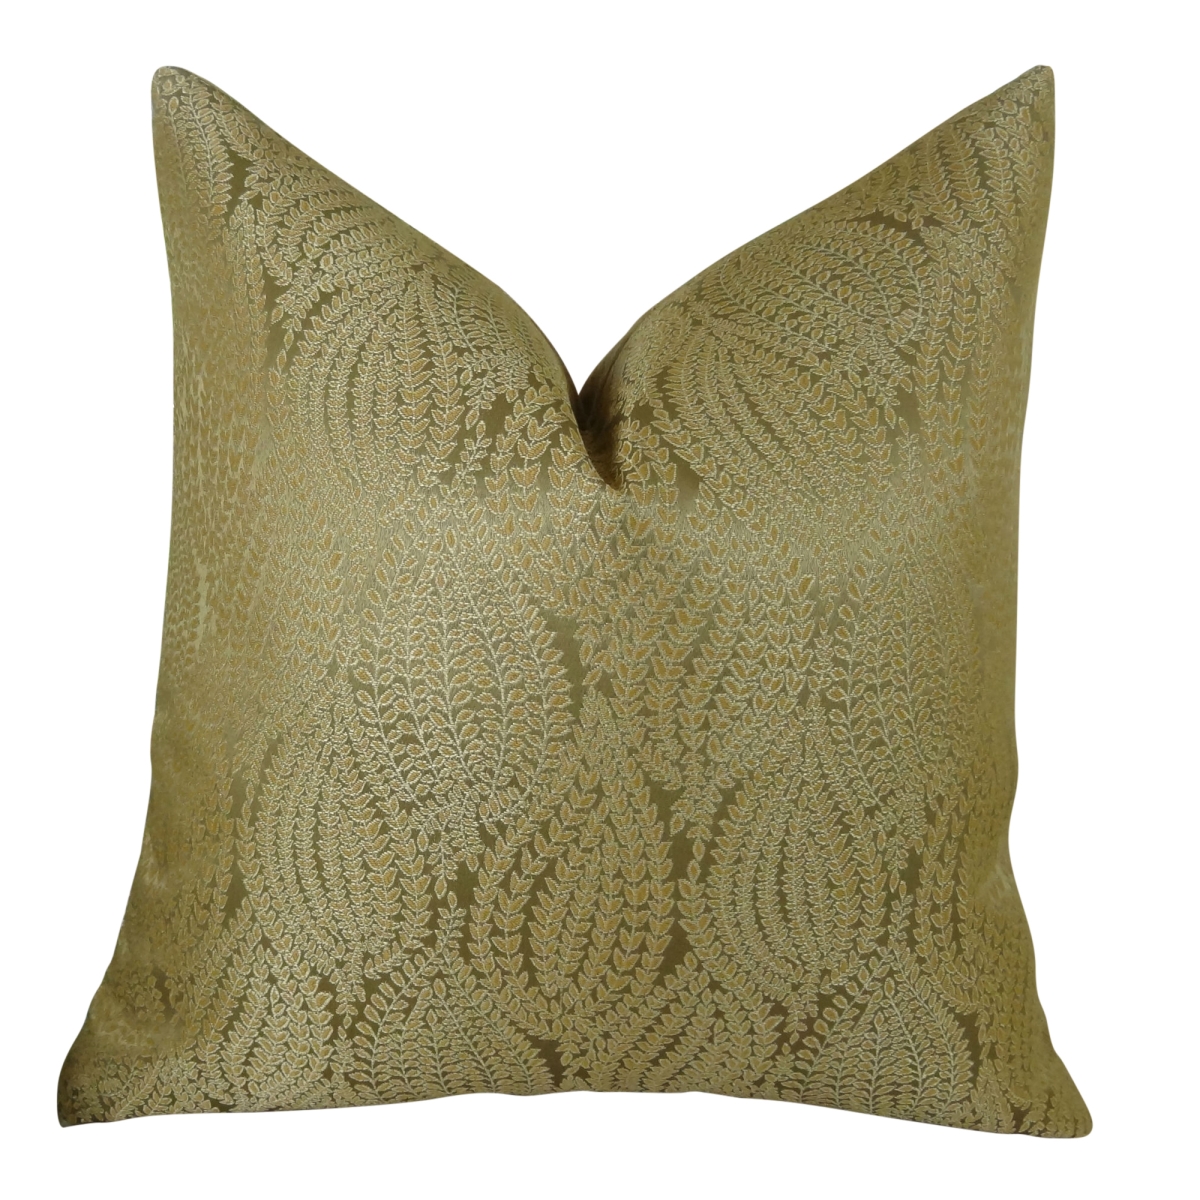 Pb11015-2036-dp 20 X 36 In. Double Sided King Size Leaf Pod Handmade Throw Pillow - Gold